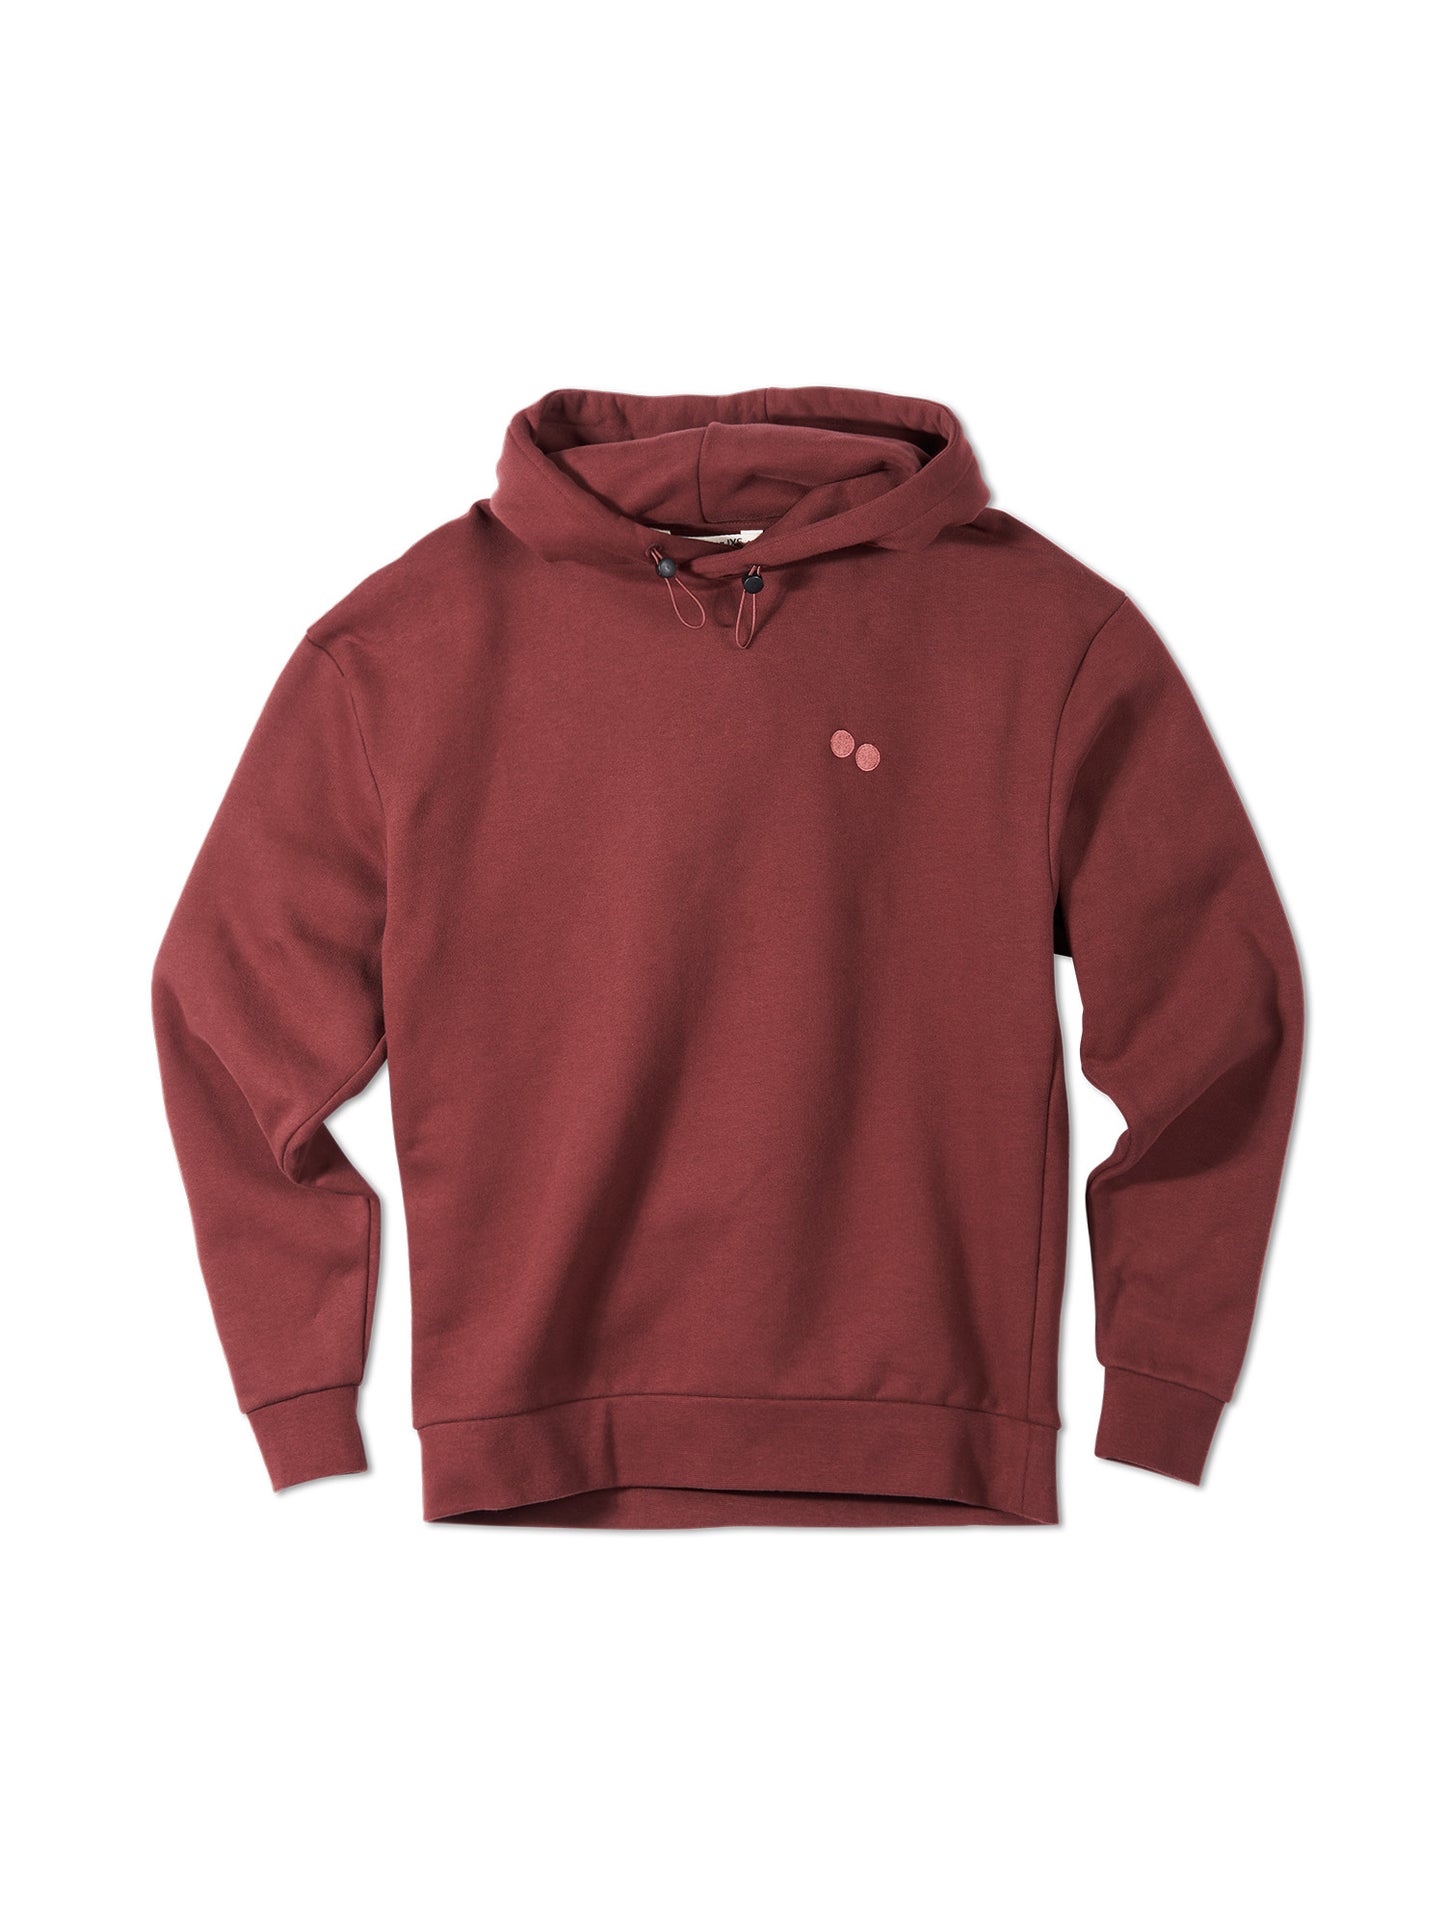 pinqponq-Hoodie-Pinot-Red-front